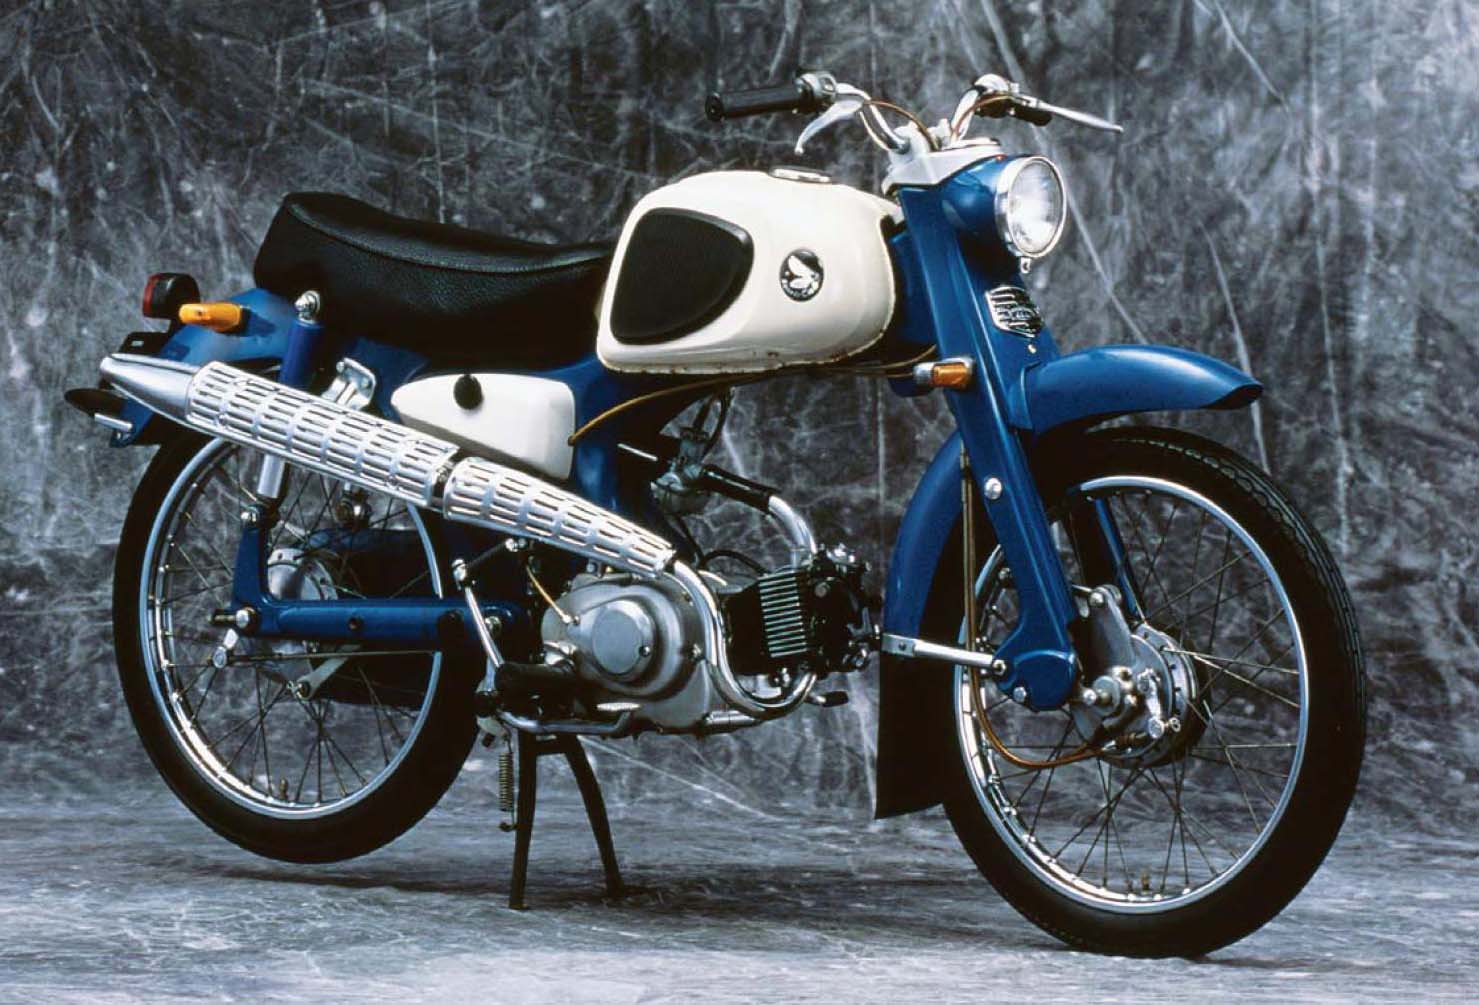 Honda C110 Super Sports Cub For Sale Specifications, Price and Images